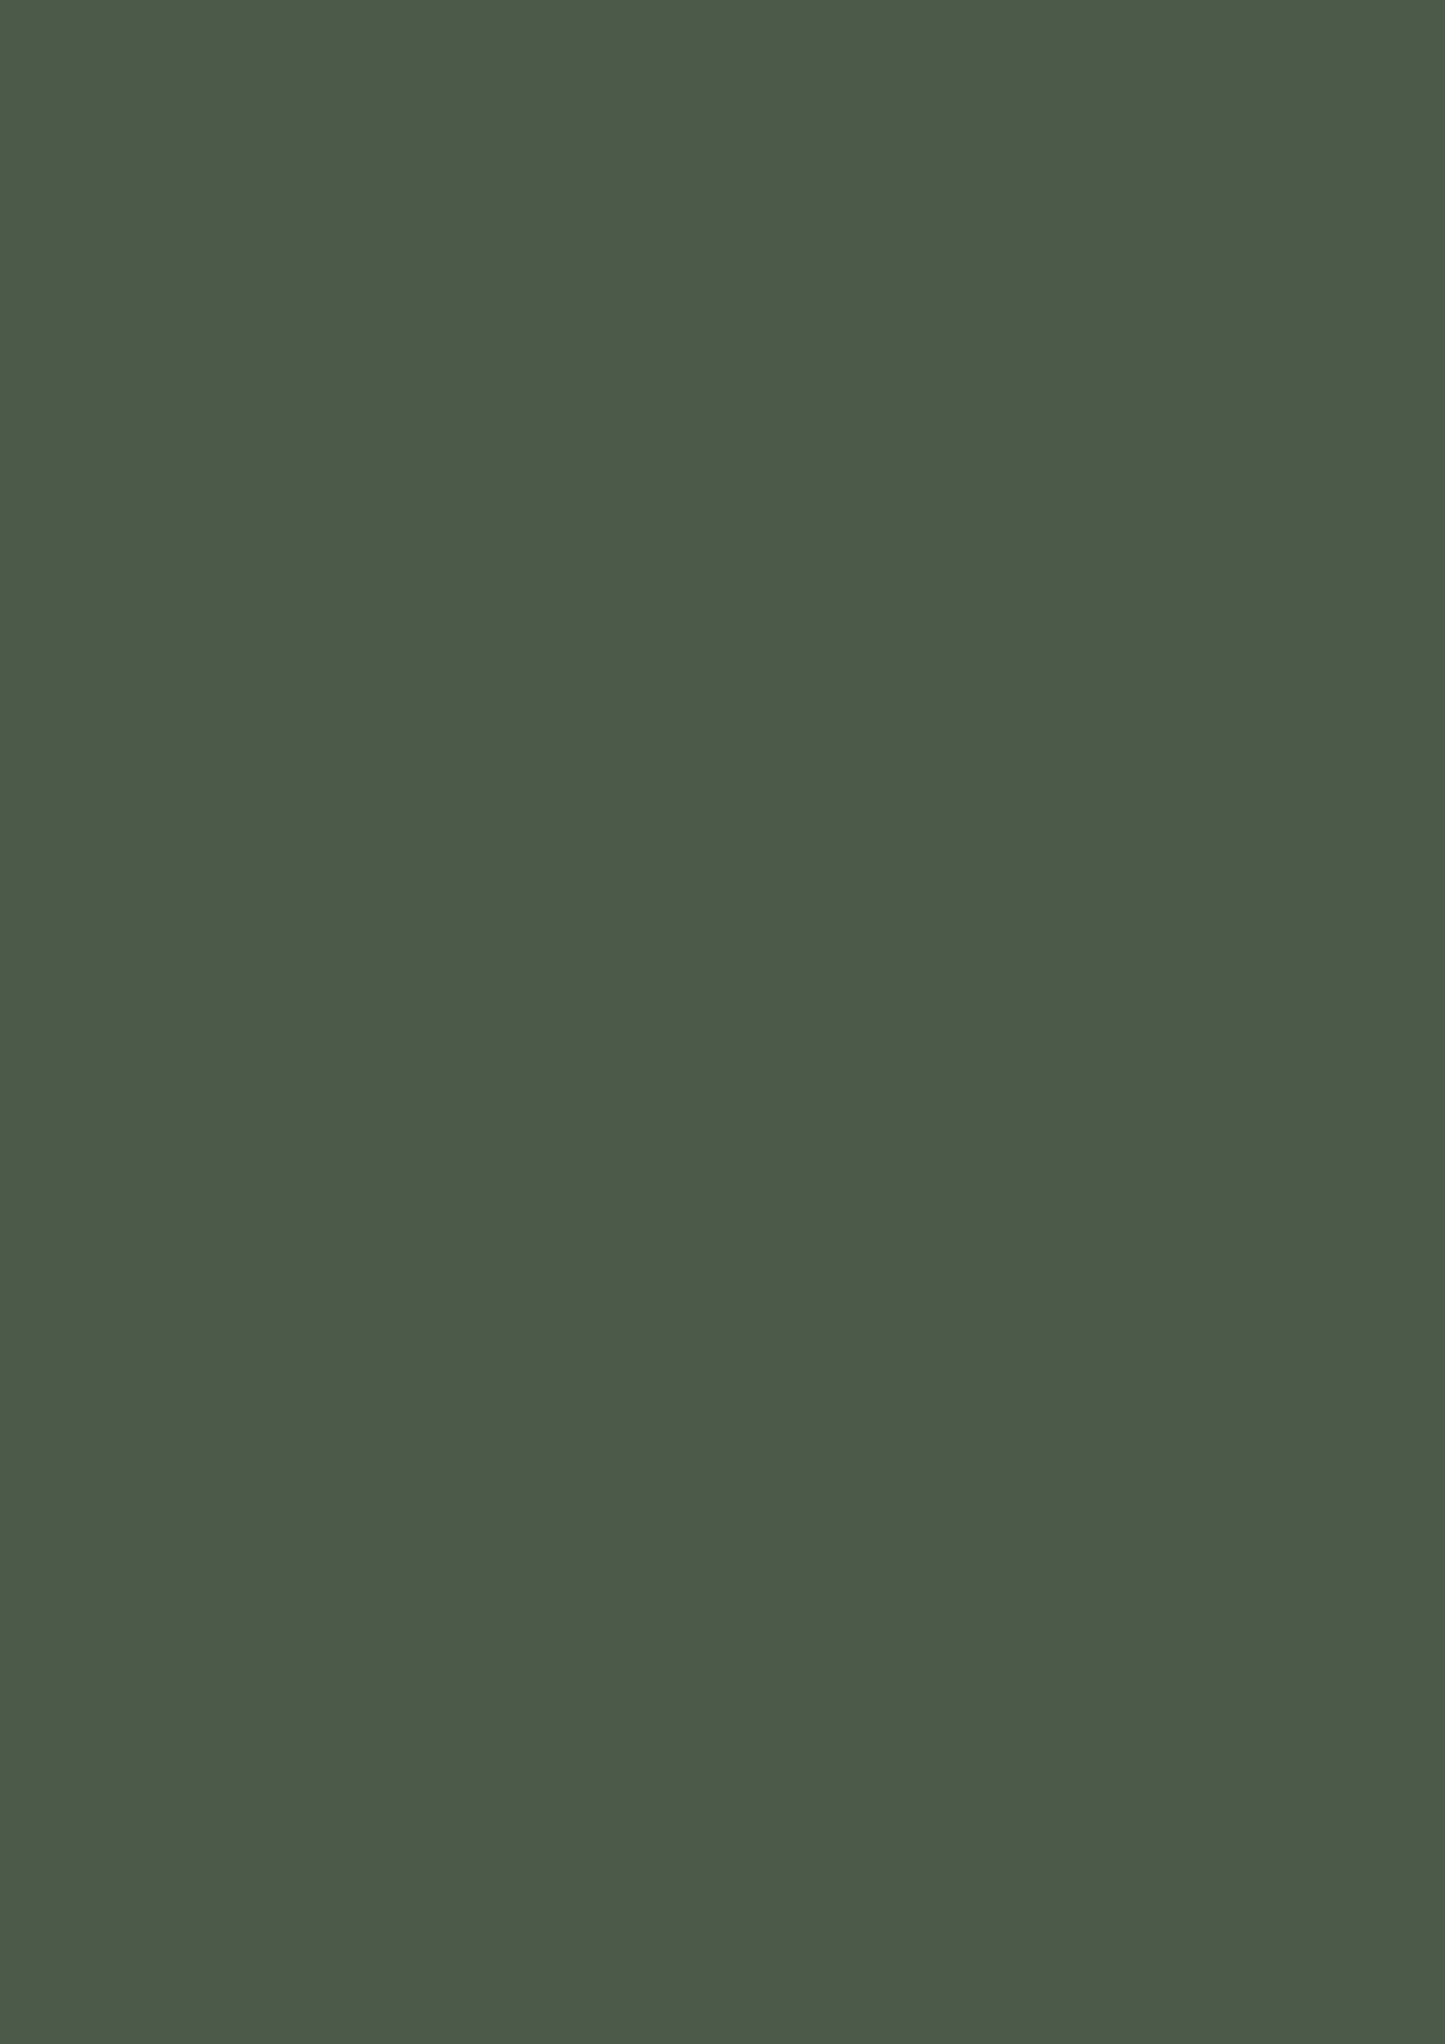 Dead Flat - Farrow and Ball - Beverly 310 - Allround